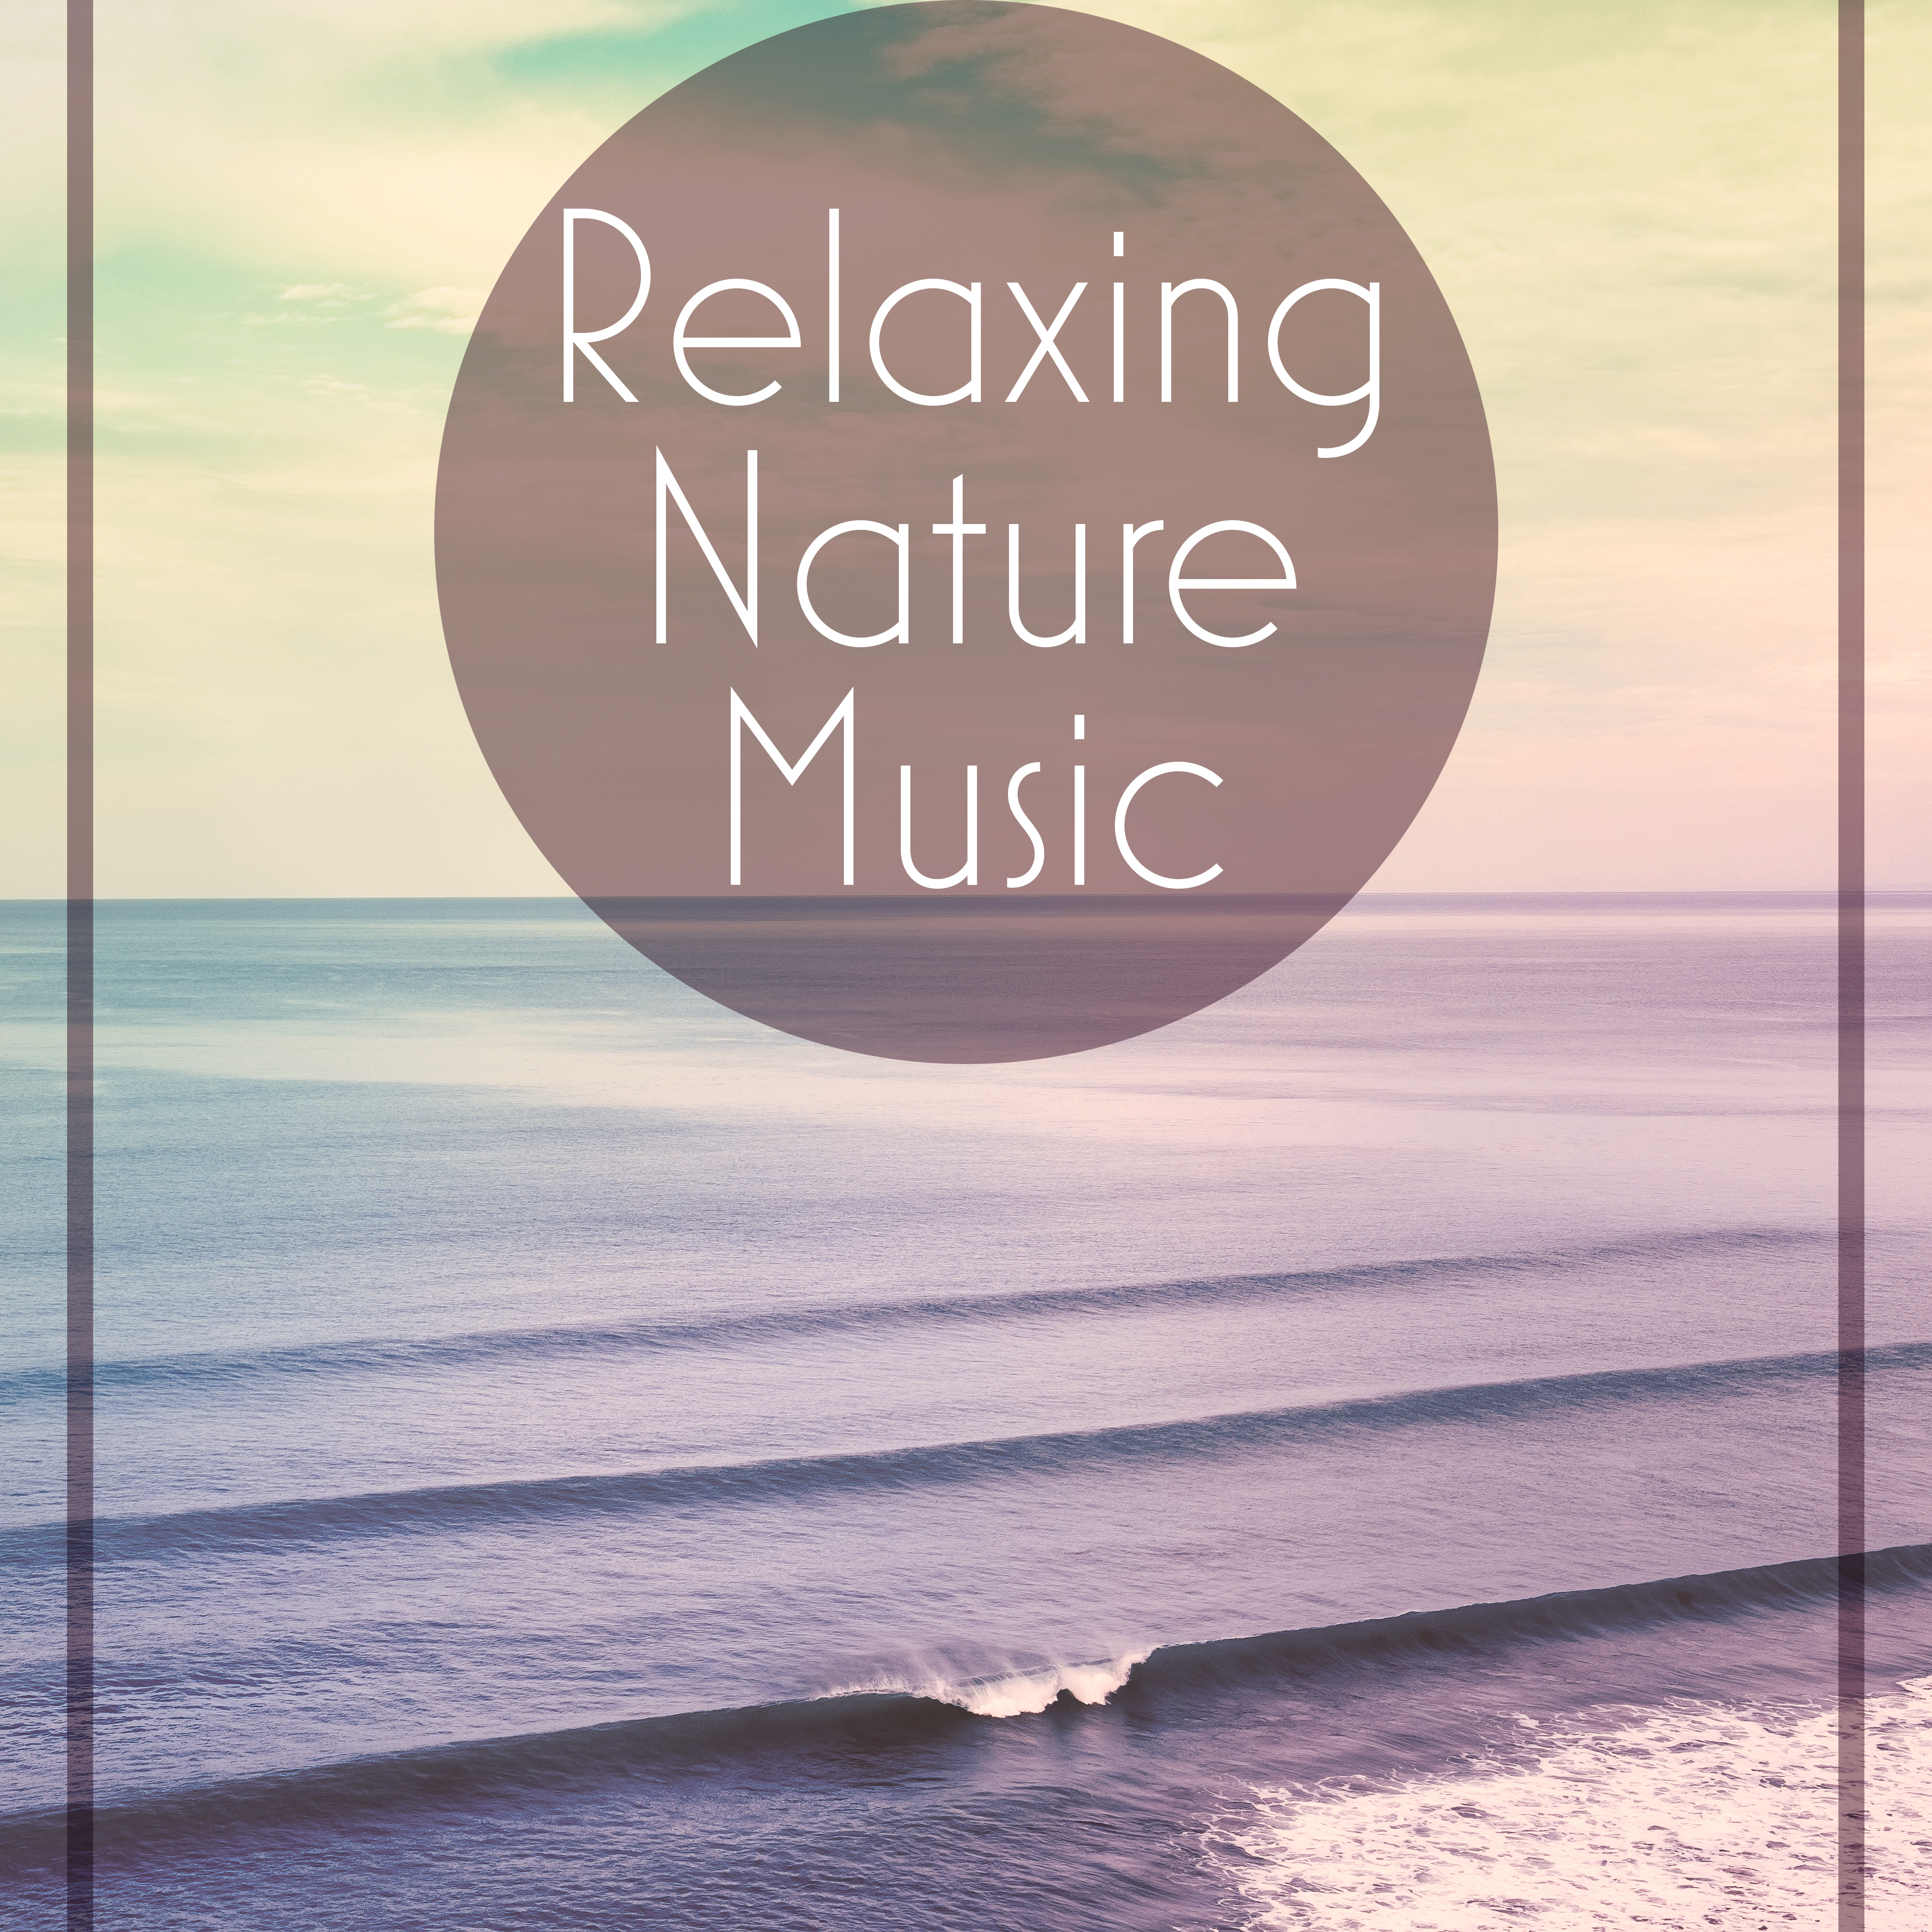 Relaxing Nature Music – New Age Soothing Sounds, Music to Rest, Beautiful Nature, Spirit Harmony